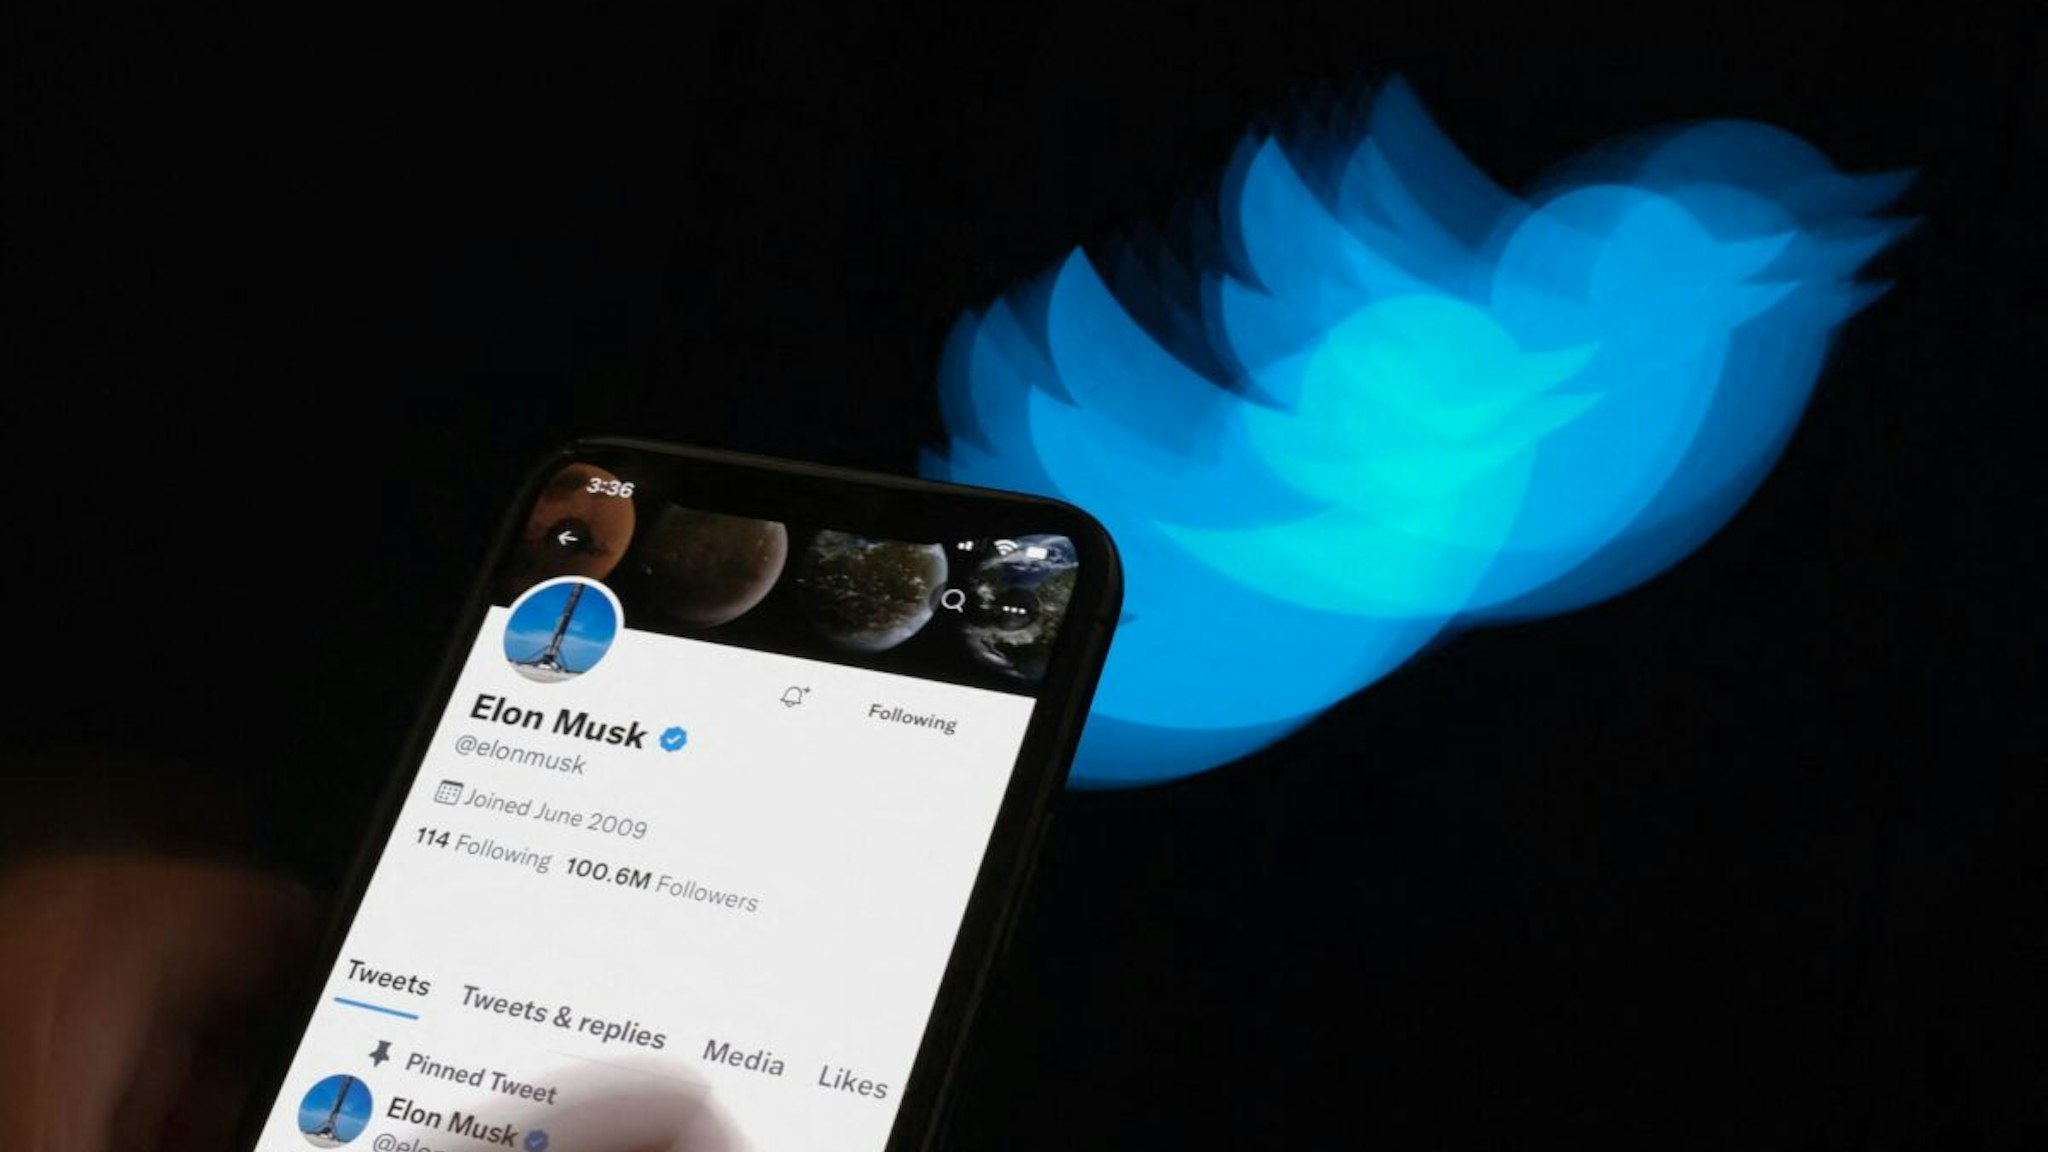 This illustration photo taken on July 8, 2022 shows Elon Musk's Twitter page displayed on the screen of a smartphone with Twitter logo in the background in Los Angeles. - Elon Musk pulled the plug on his deal to buy Twitter on July 8, 2022, accusing the company of "misleading" statements about the number of fake accounts, a regulatory filing showed.